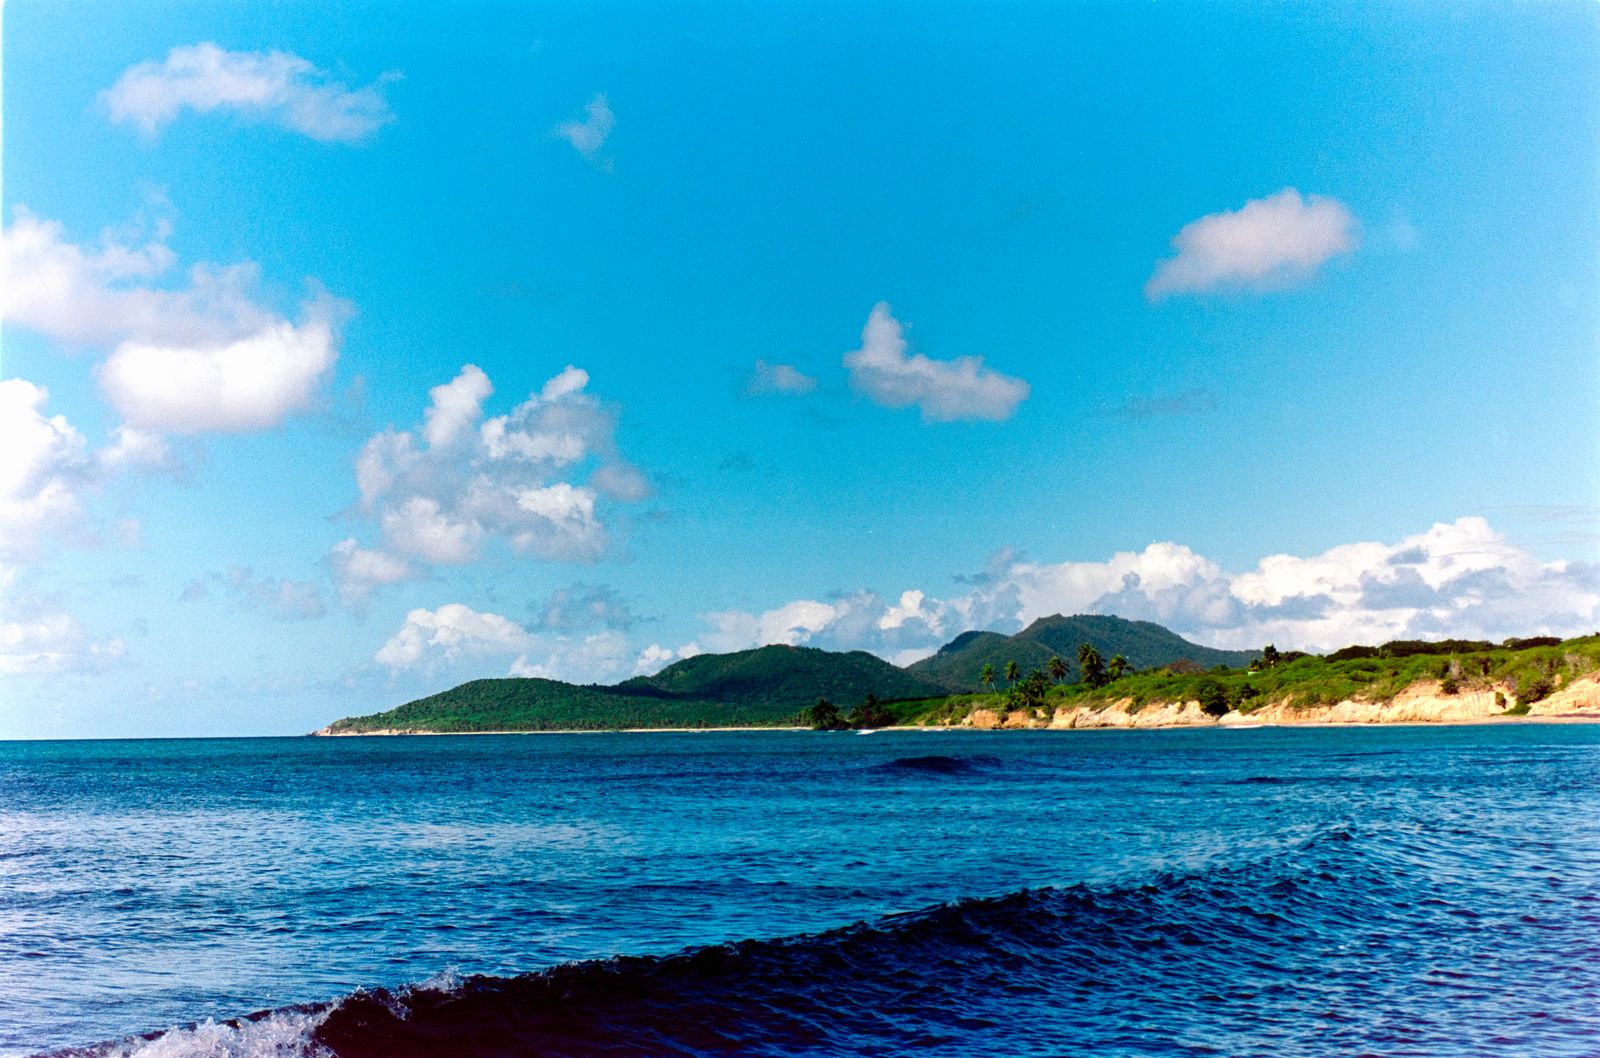 Vieques, Puerto Rico with the Nikon F3